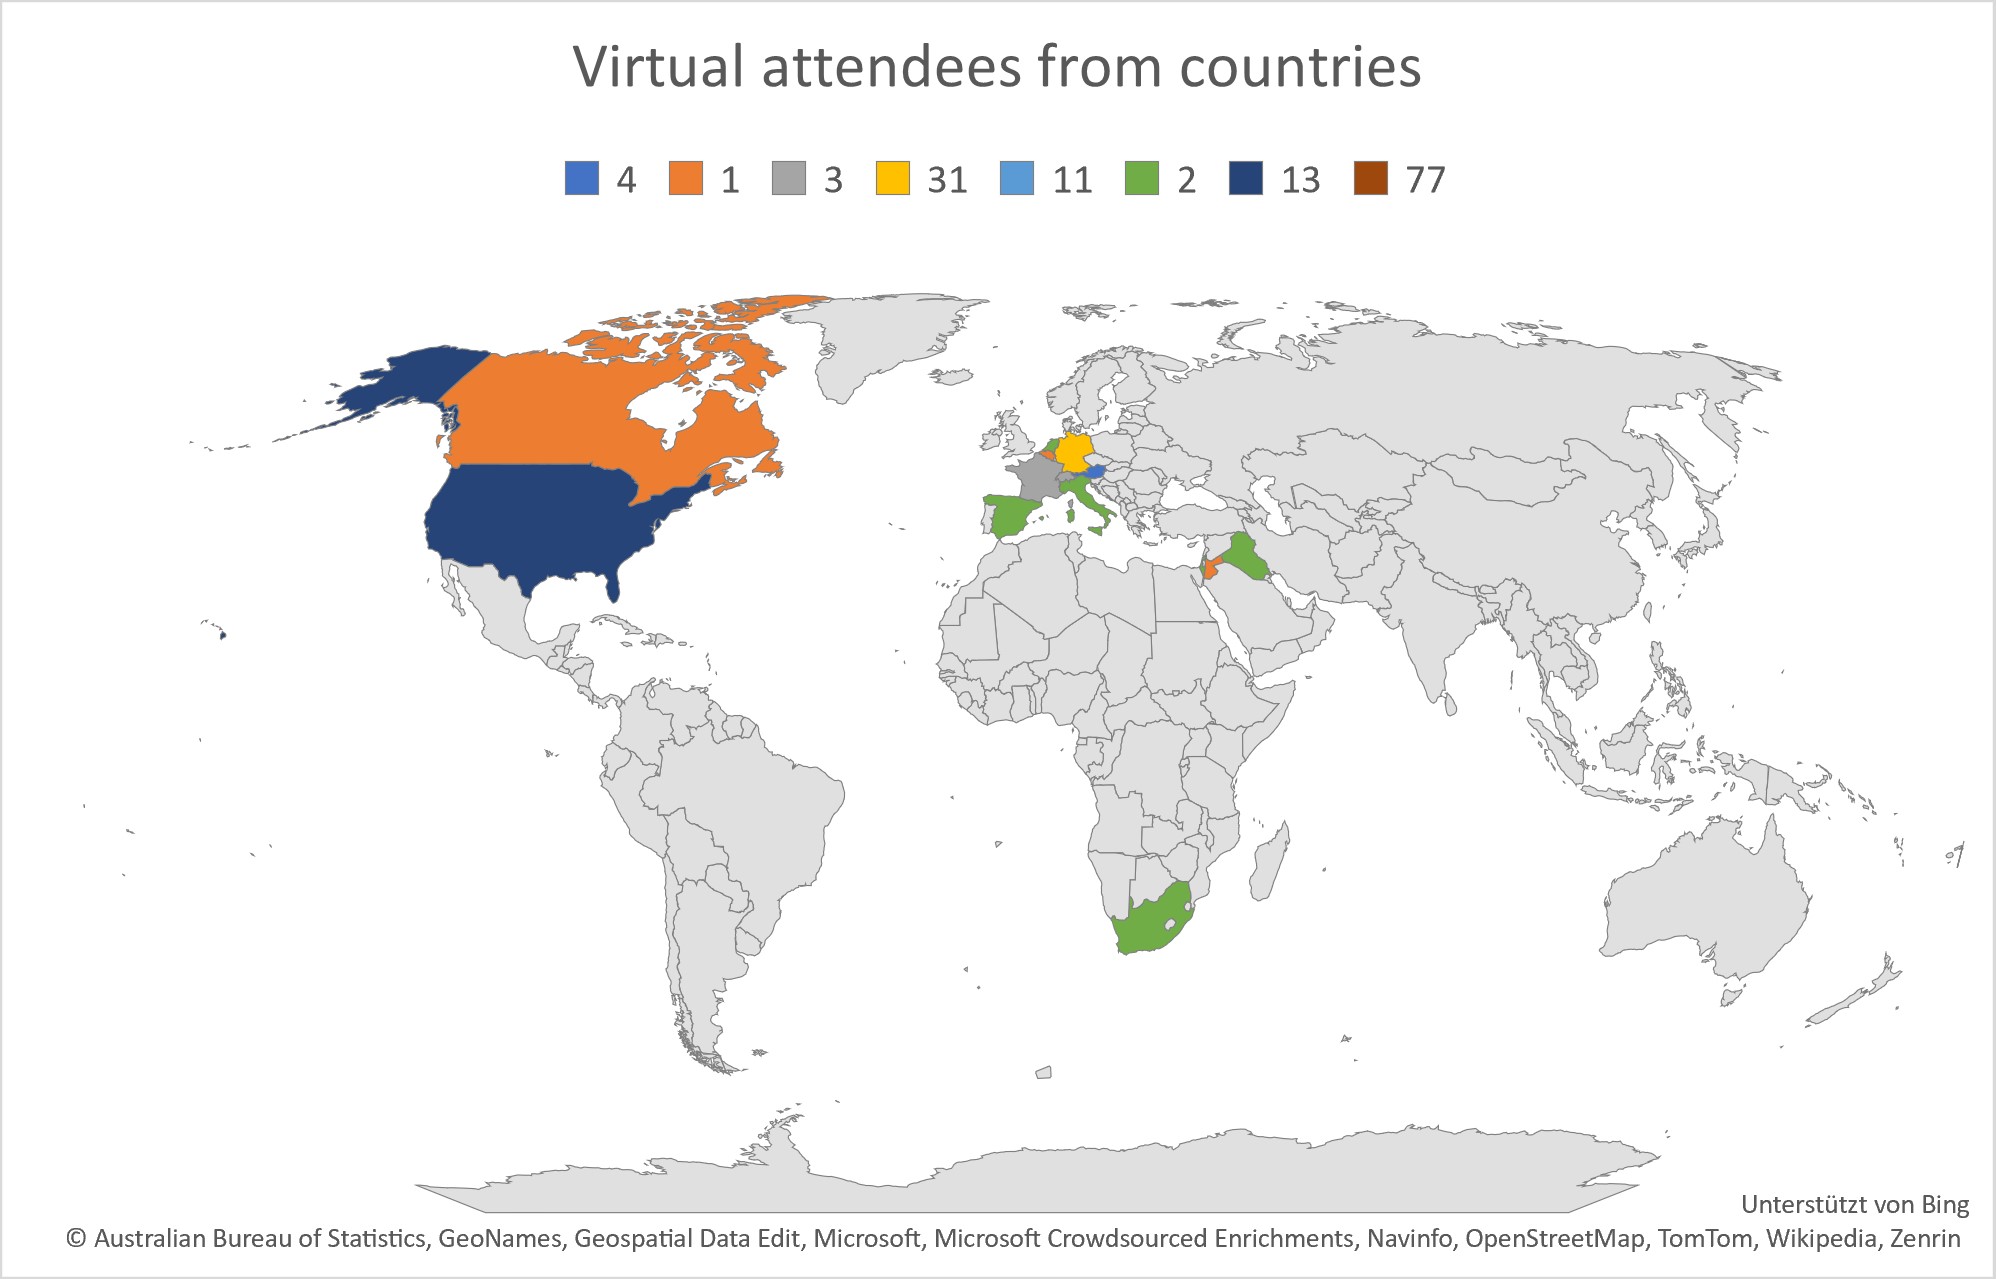 Virtual attendance by country